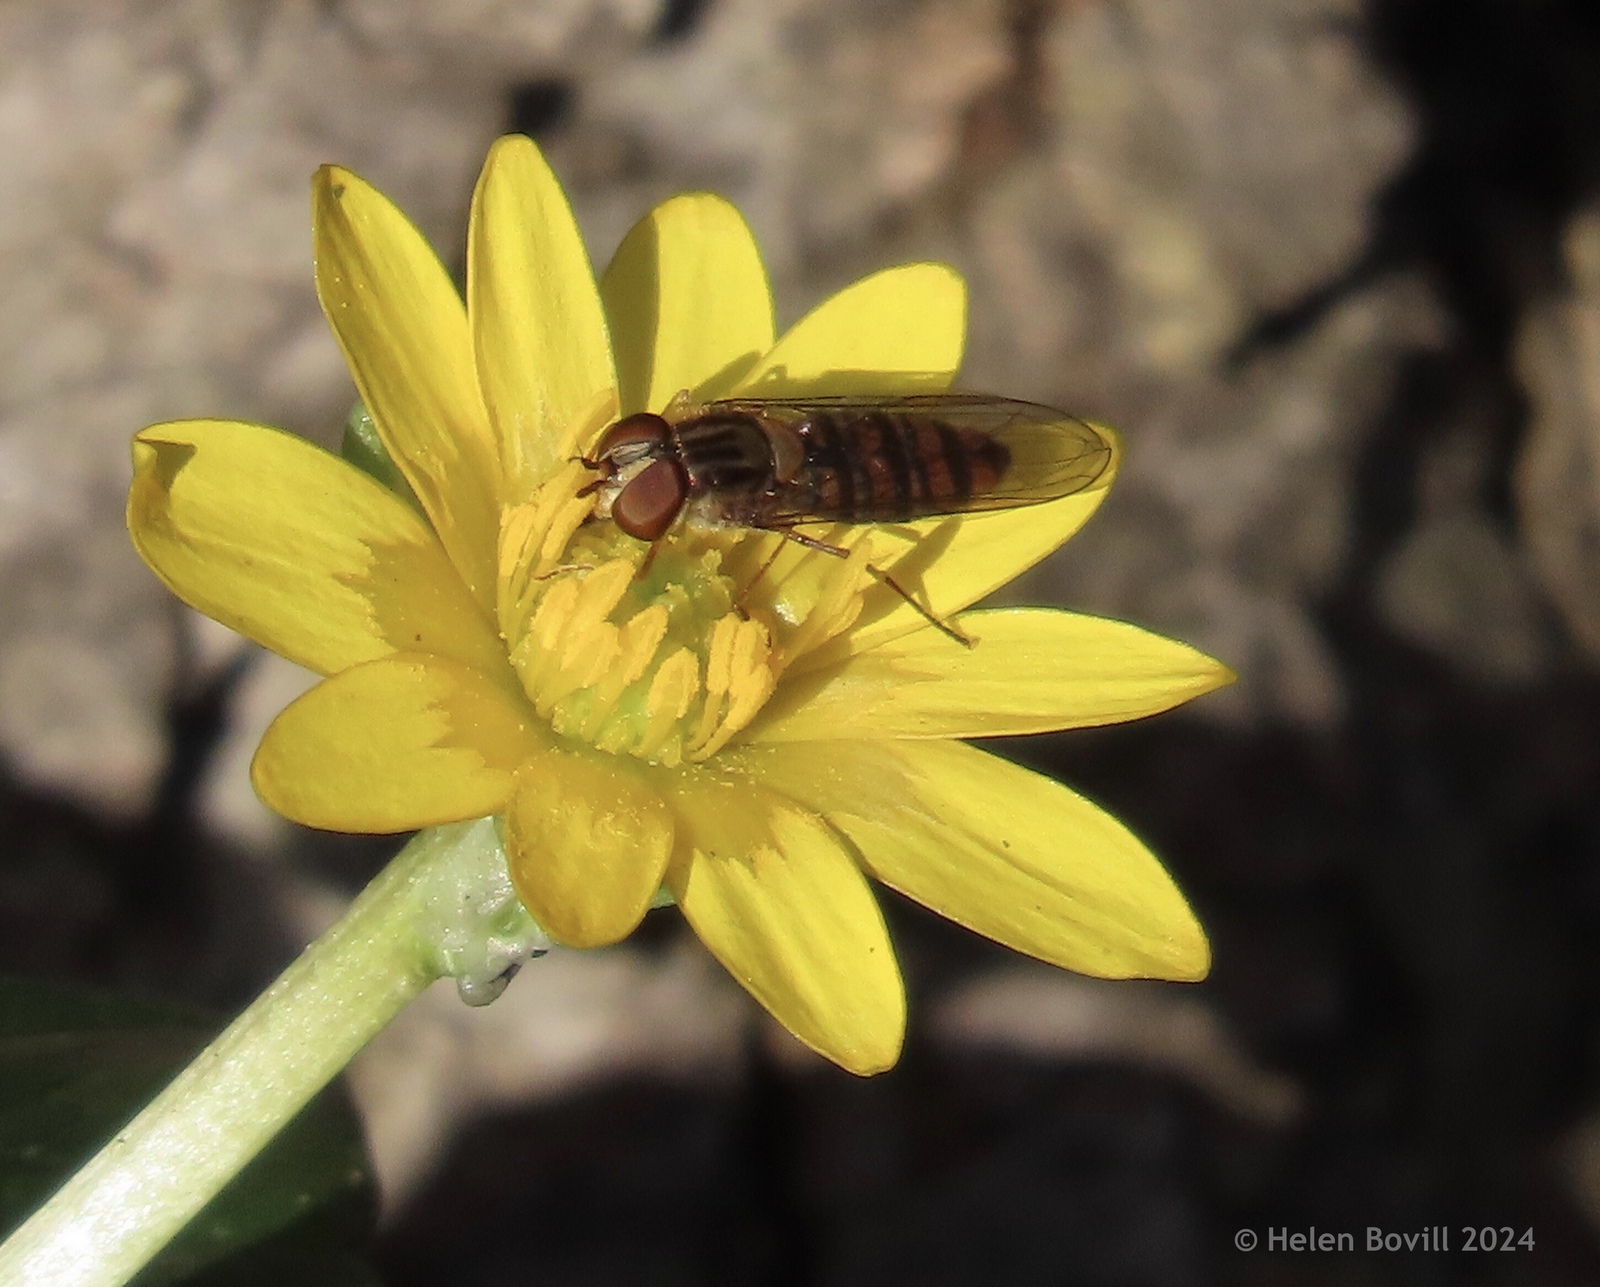 A Marmalade Hoverfly on  the yellow flower of a Lesser celandine